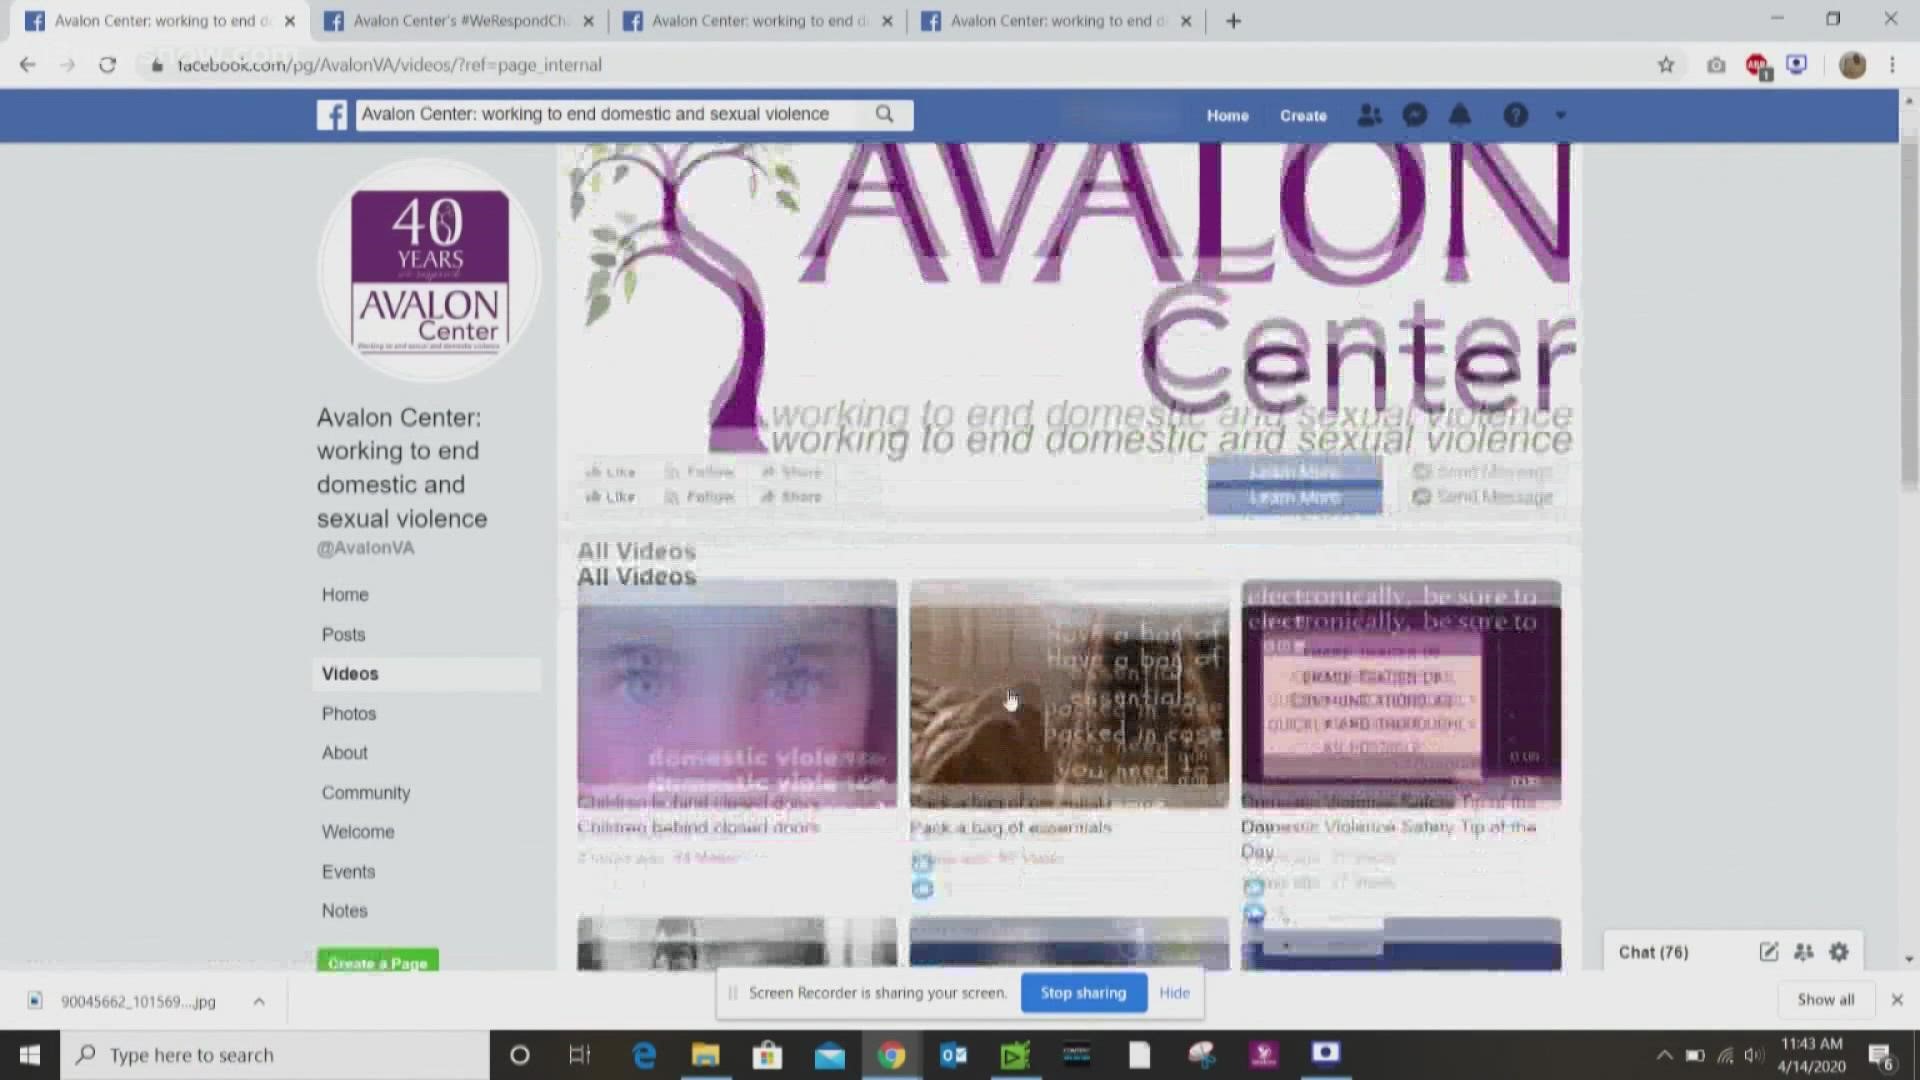 Avalon Center in Williamsburg is pushing to educate people on domestic violence and help bring more awareness to the issue.